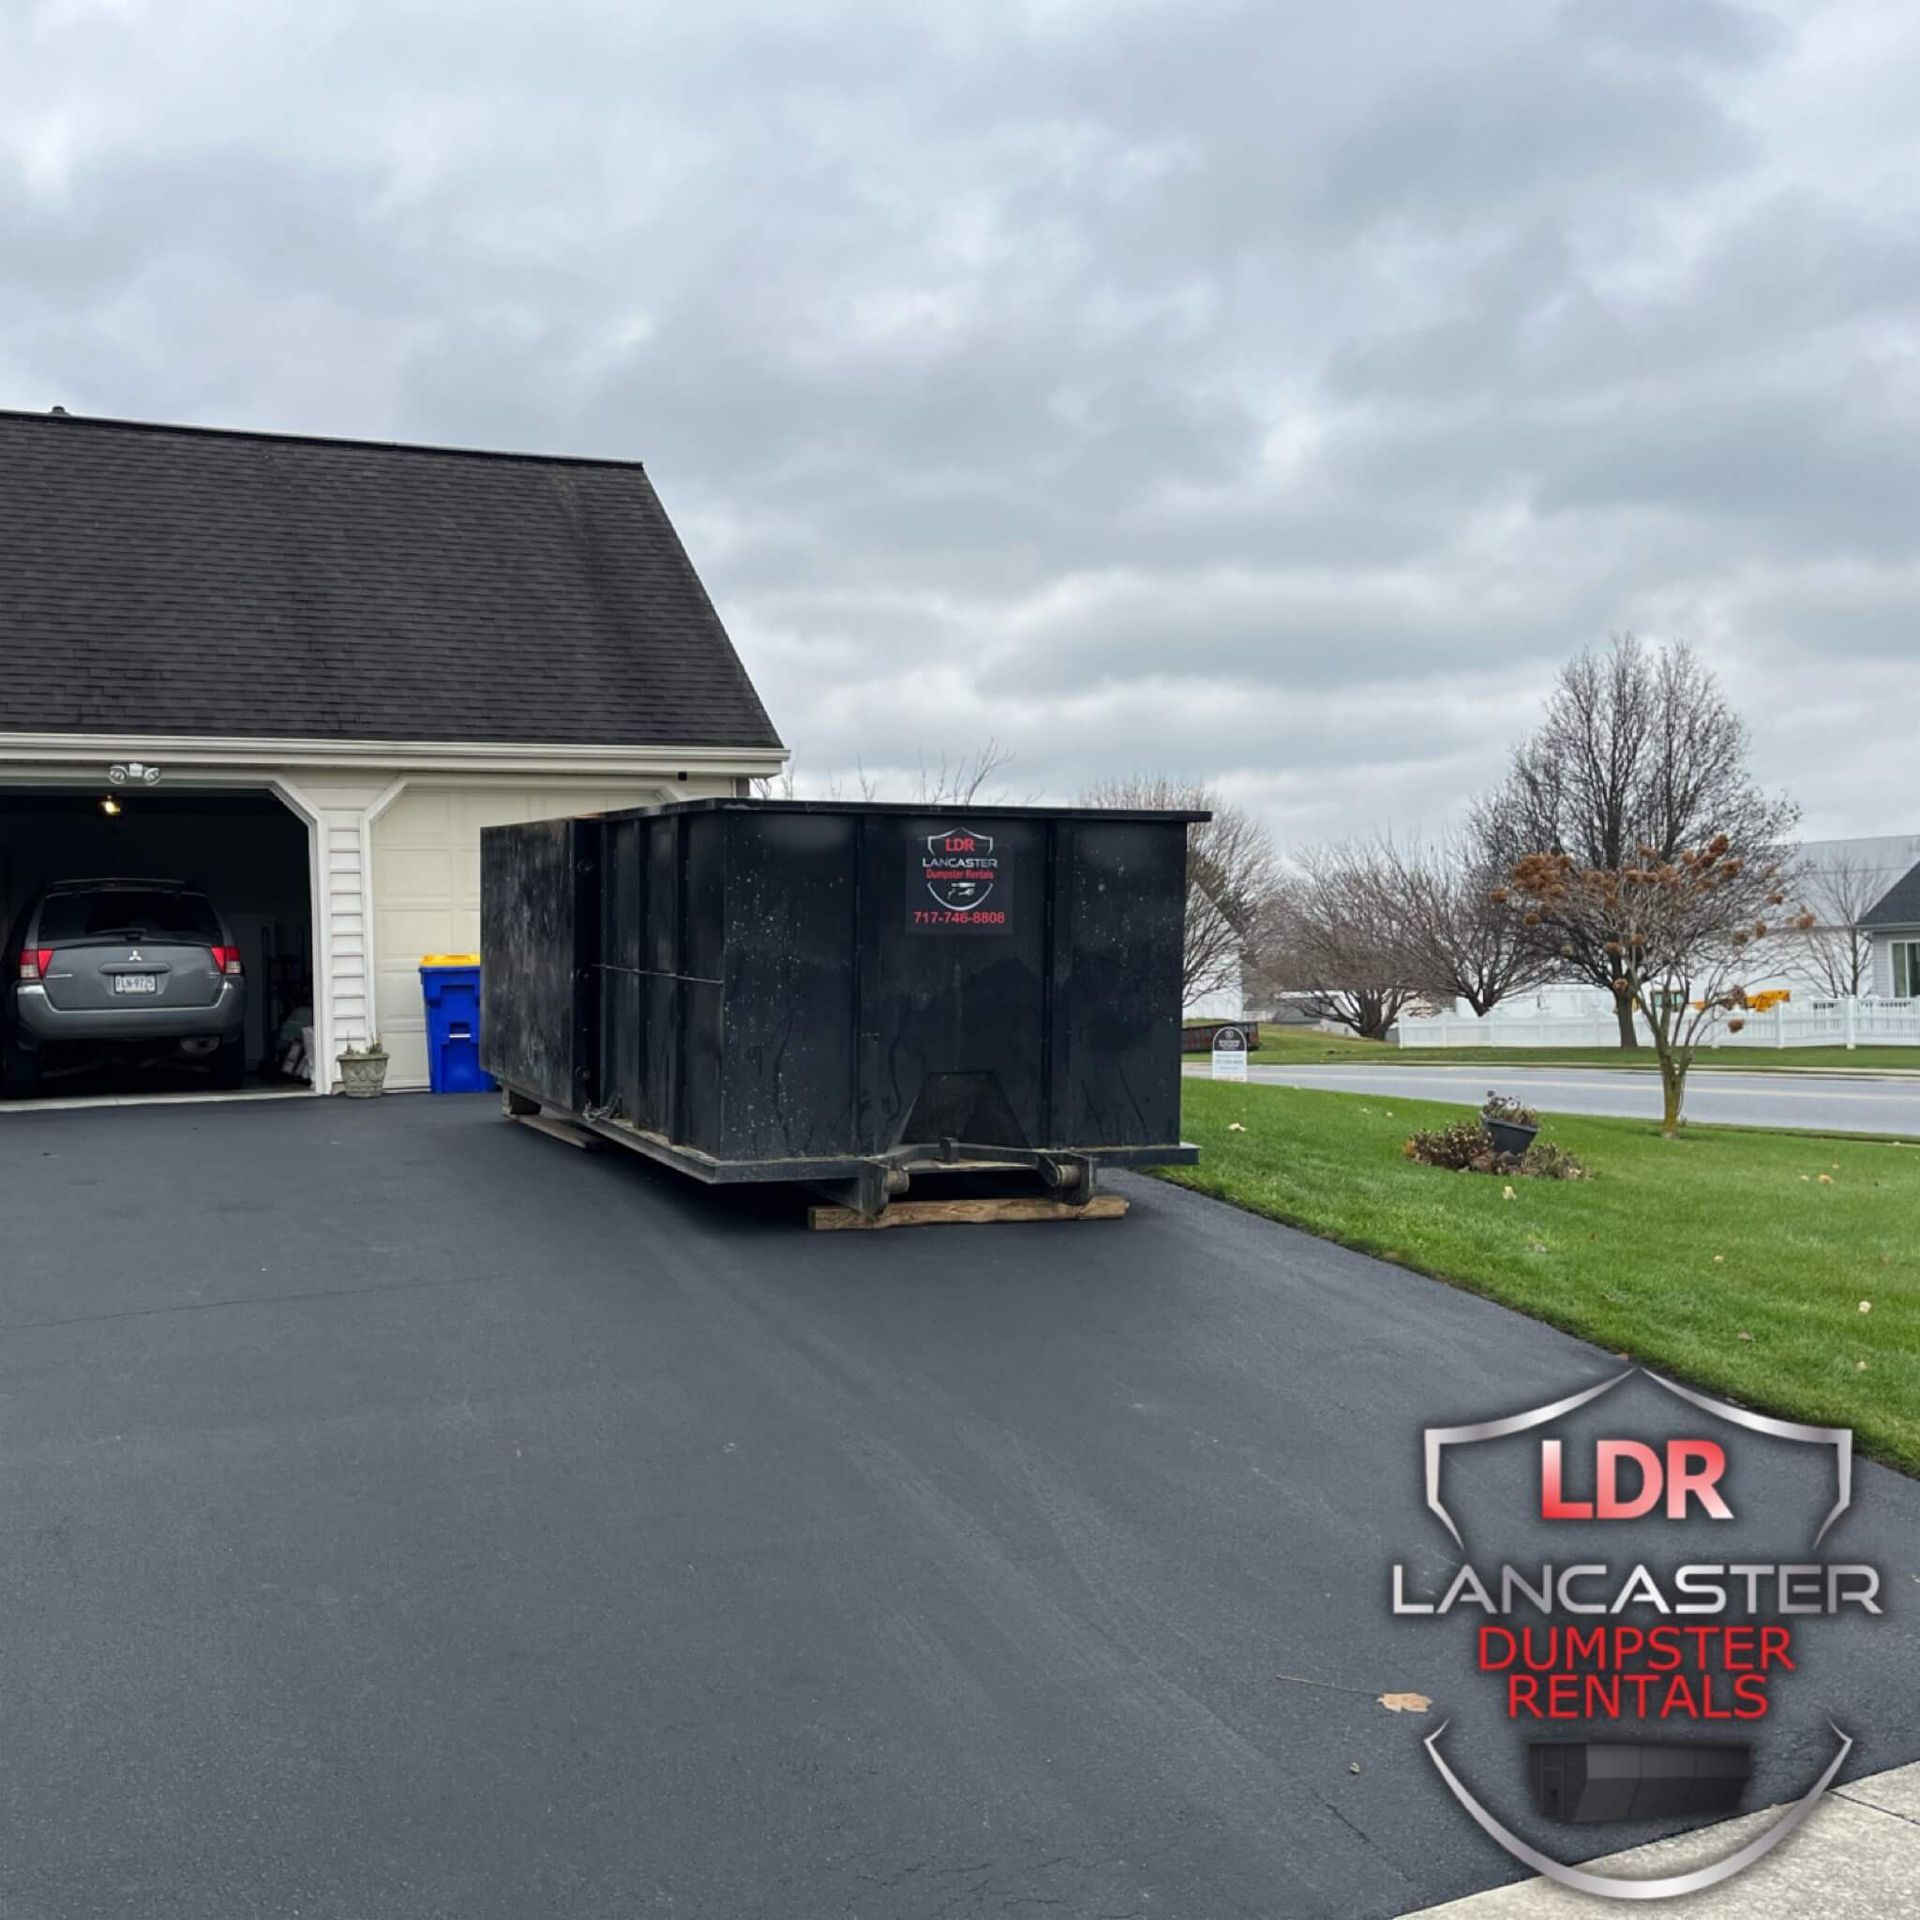 Dumpster Rental in Pequea Pa